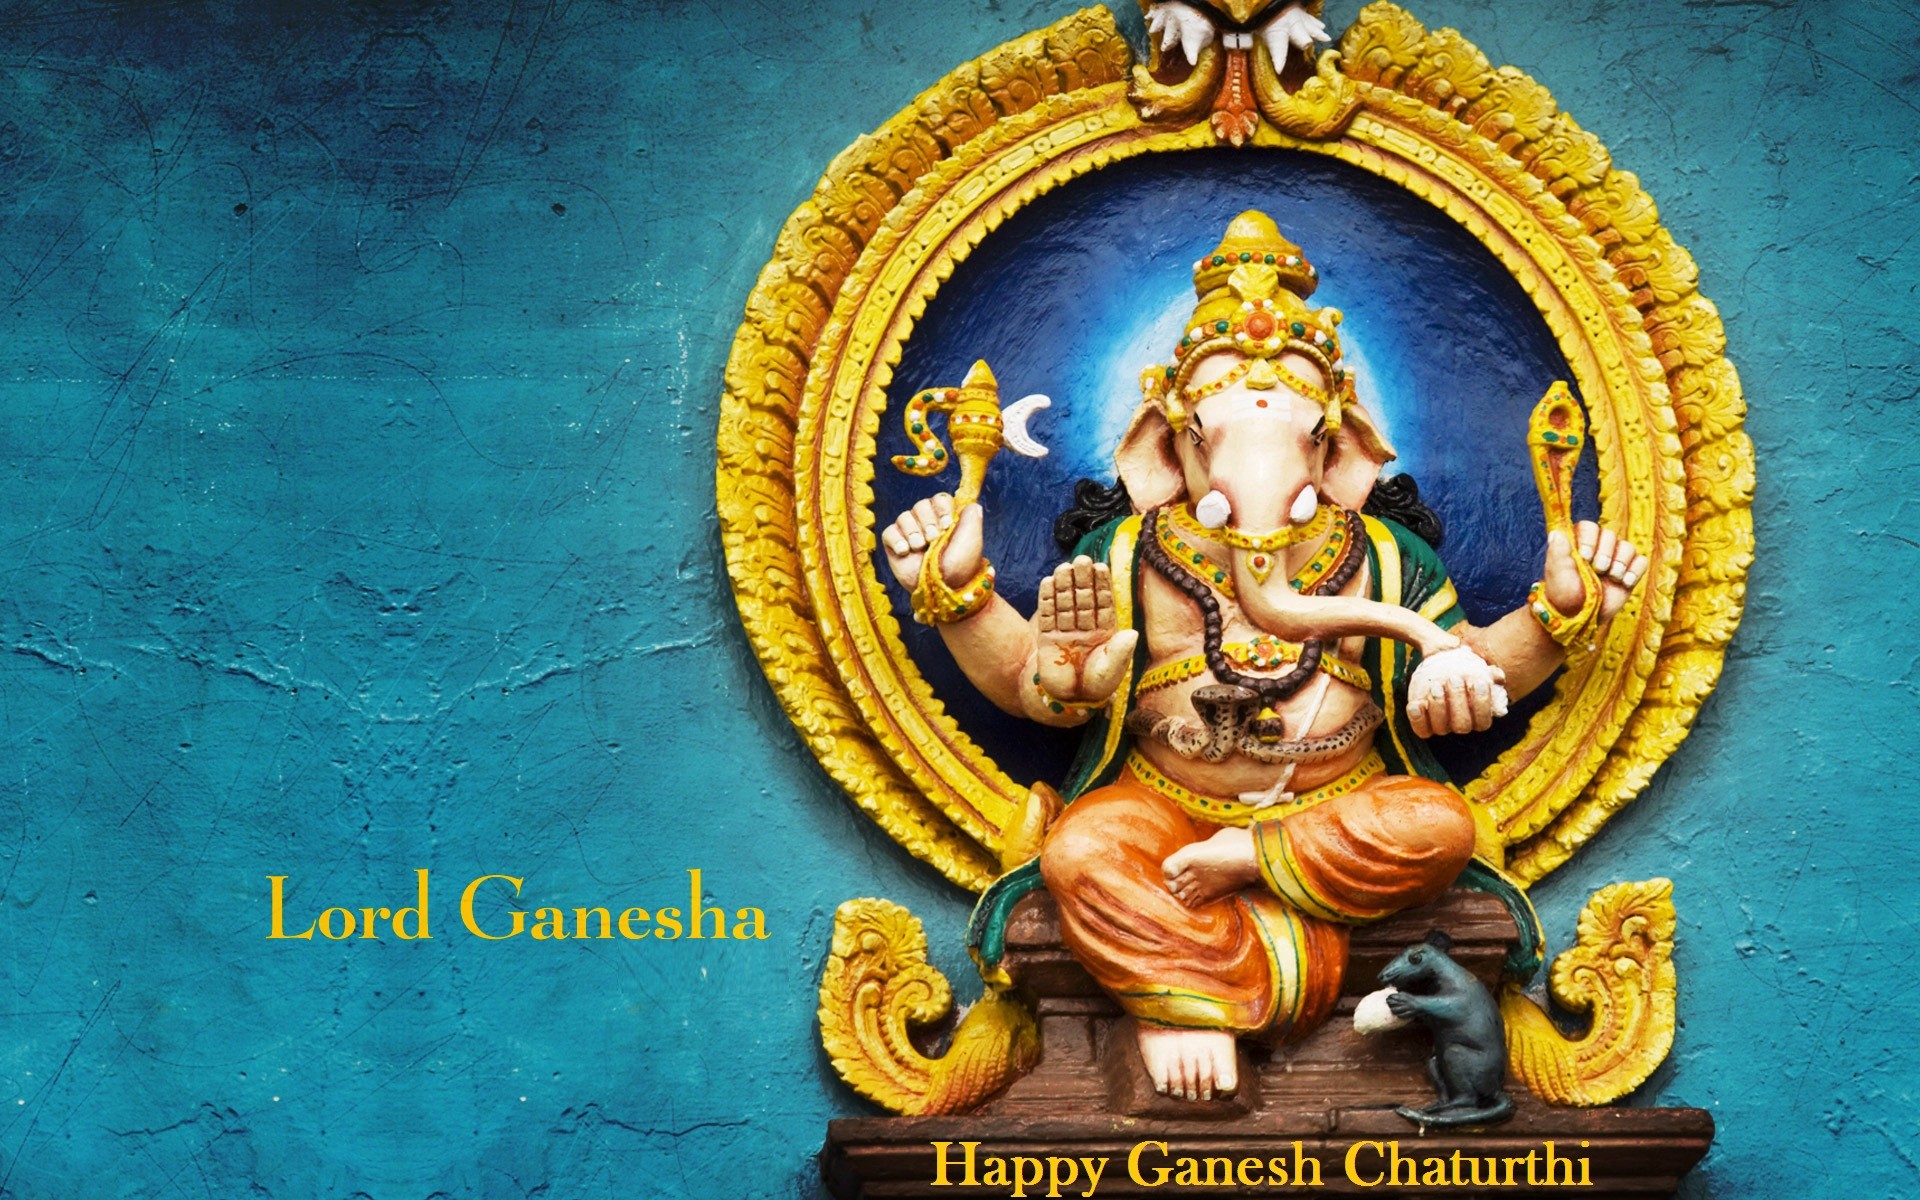 Lord Ganesh Chaturthi 2014 HD Wallpapers Happy Ganesh Chaturthi 2013 Pinterest Ganesh, Ganesh wallpaper and Happy ganesh chaturthi